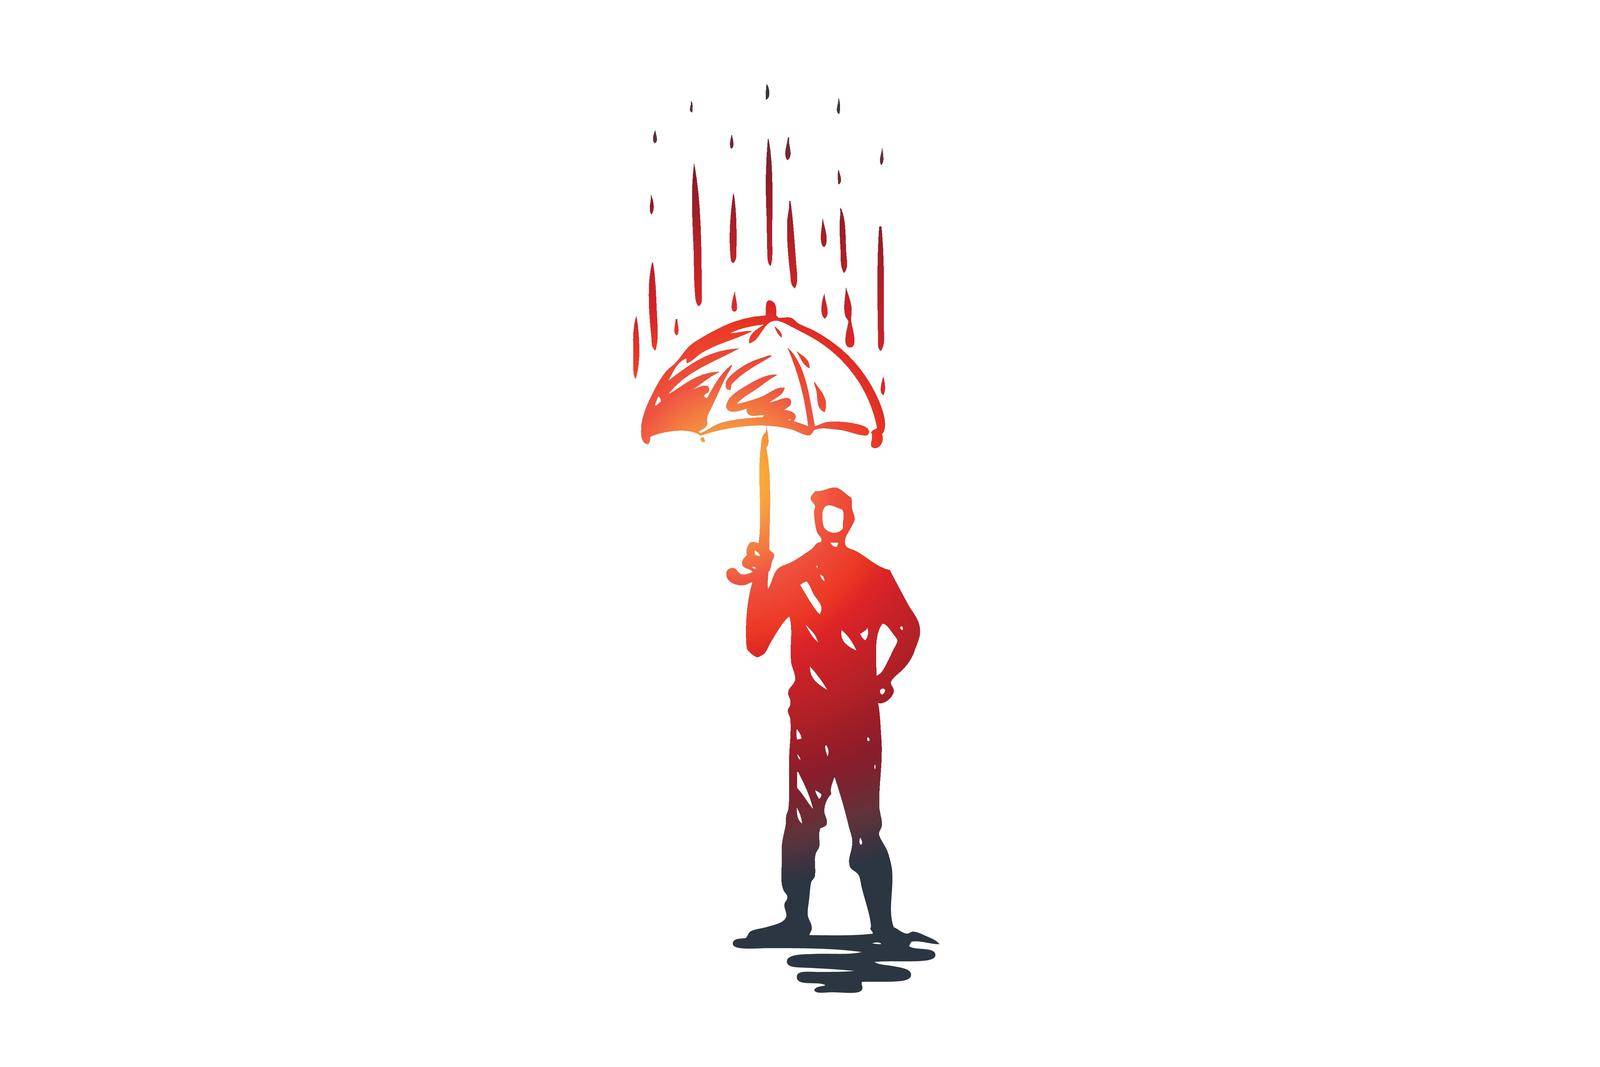 Reliability, safety, protect, safe, secure concept. Hand drawn person with umbrella under rain concept sketch. Isolated vector illustration.